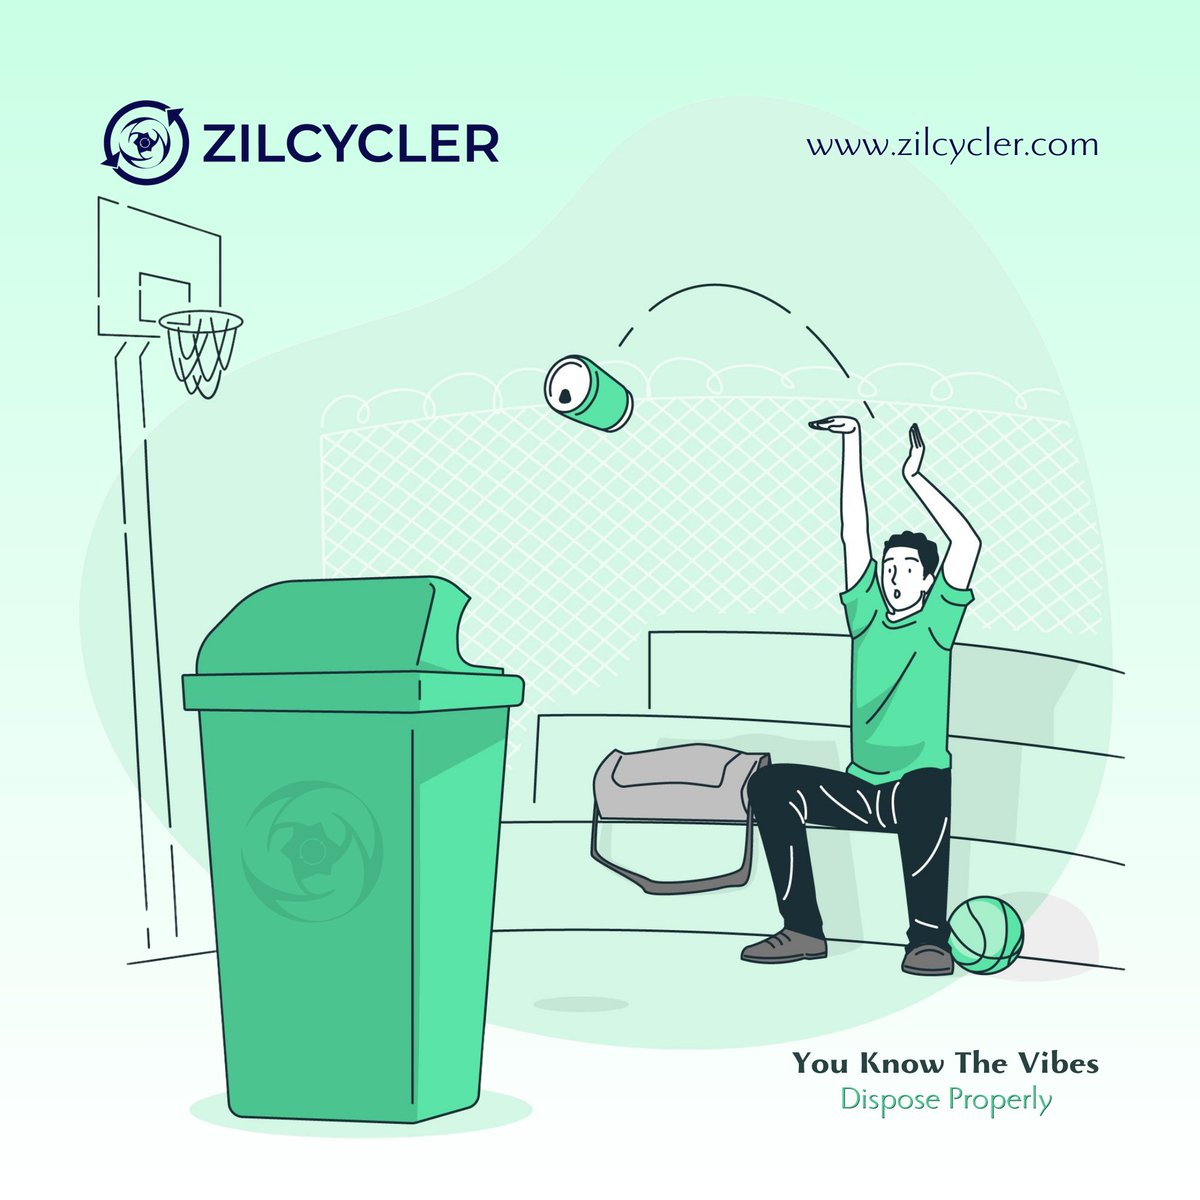 Don't Litter. Dispose Properly 🗑

#LessWaste #SocialResponsibility #Sustainability #WasteManagement #Recycle #Zilcycler